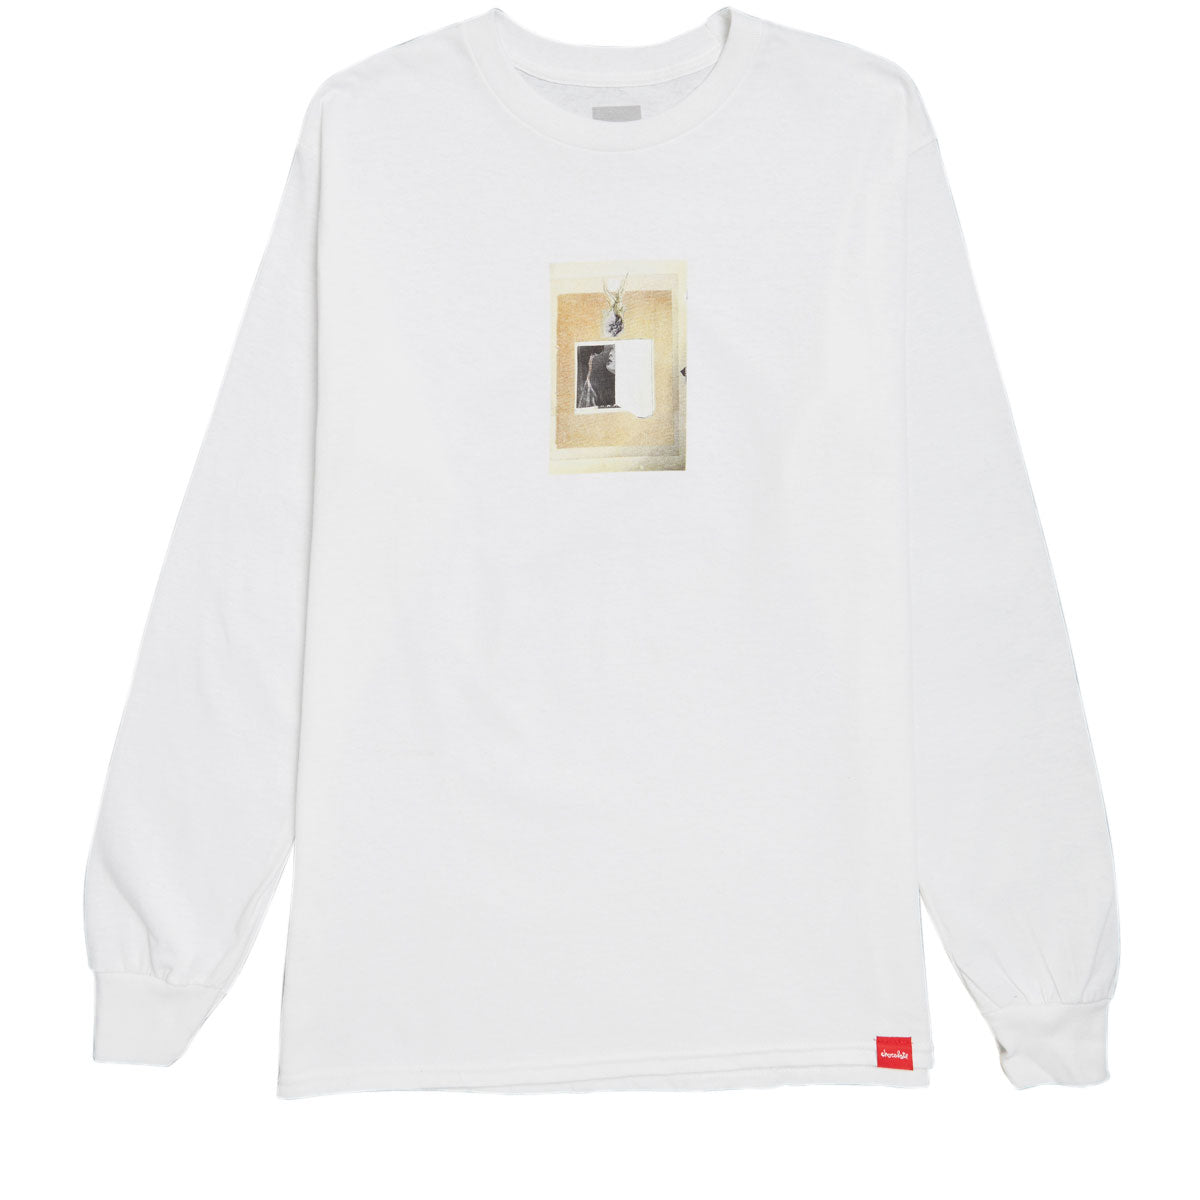 Chocolate Light Pieces Long Sleeve T-Shirt - White image 1